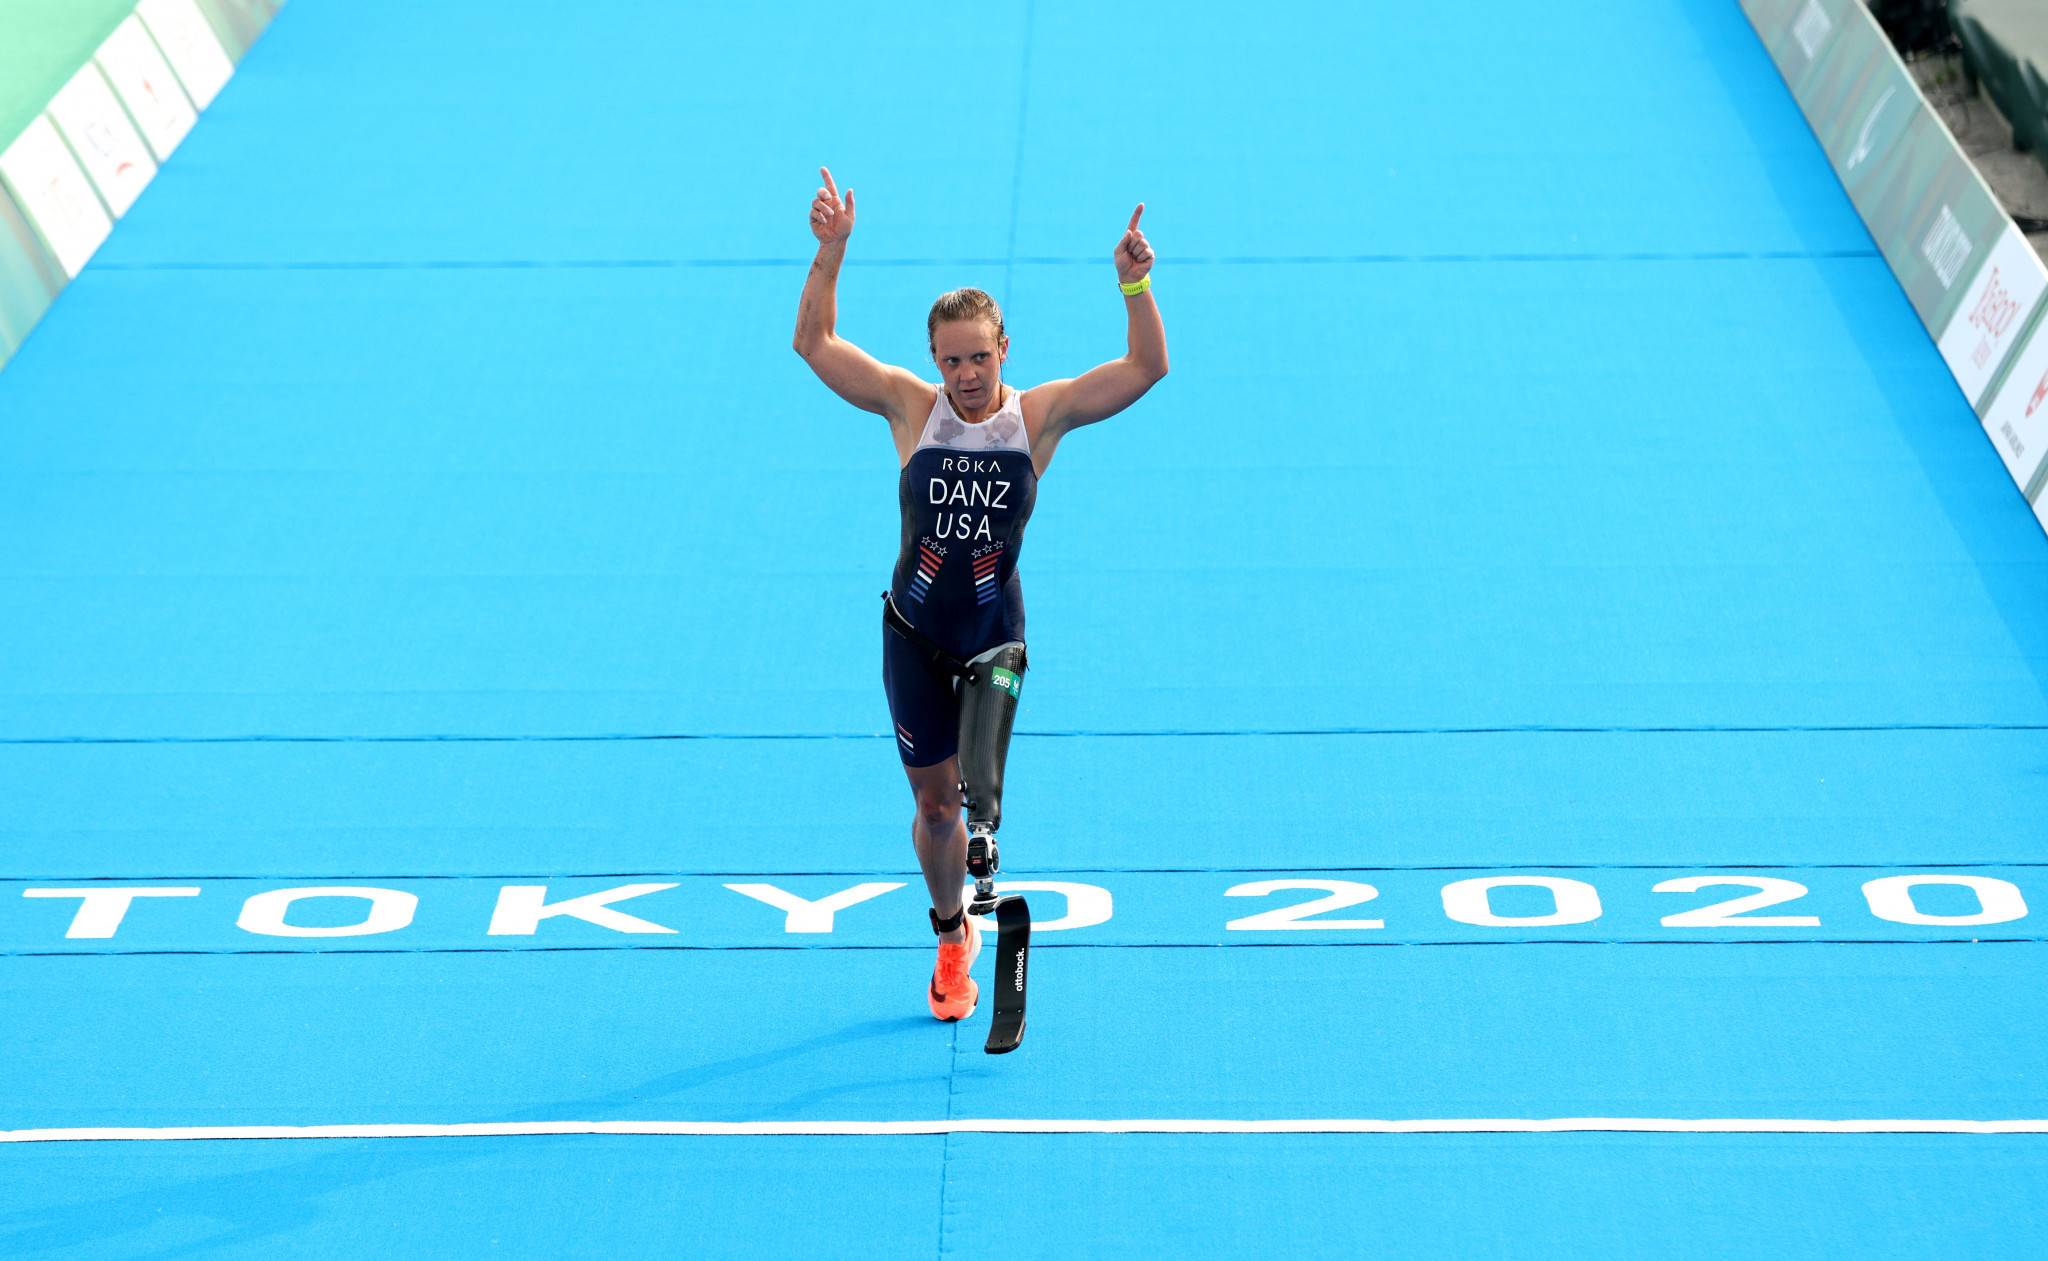 Paralympic silver medallist Hailey Danz earned the women's PTS2 title at the Americas Triathlon Para Championships in Sarasota-Bradenton ©Getty Images